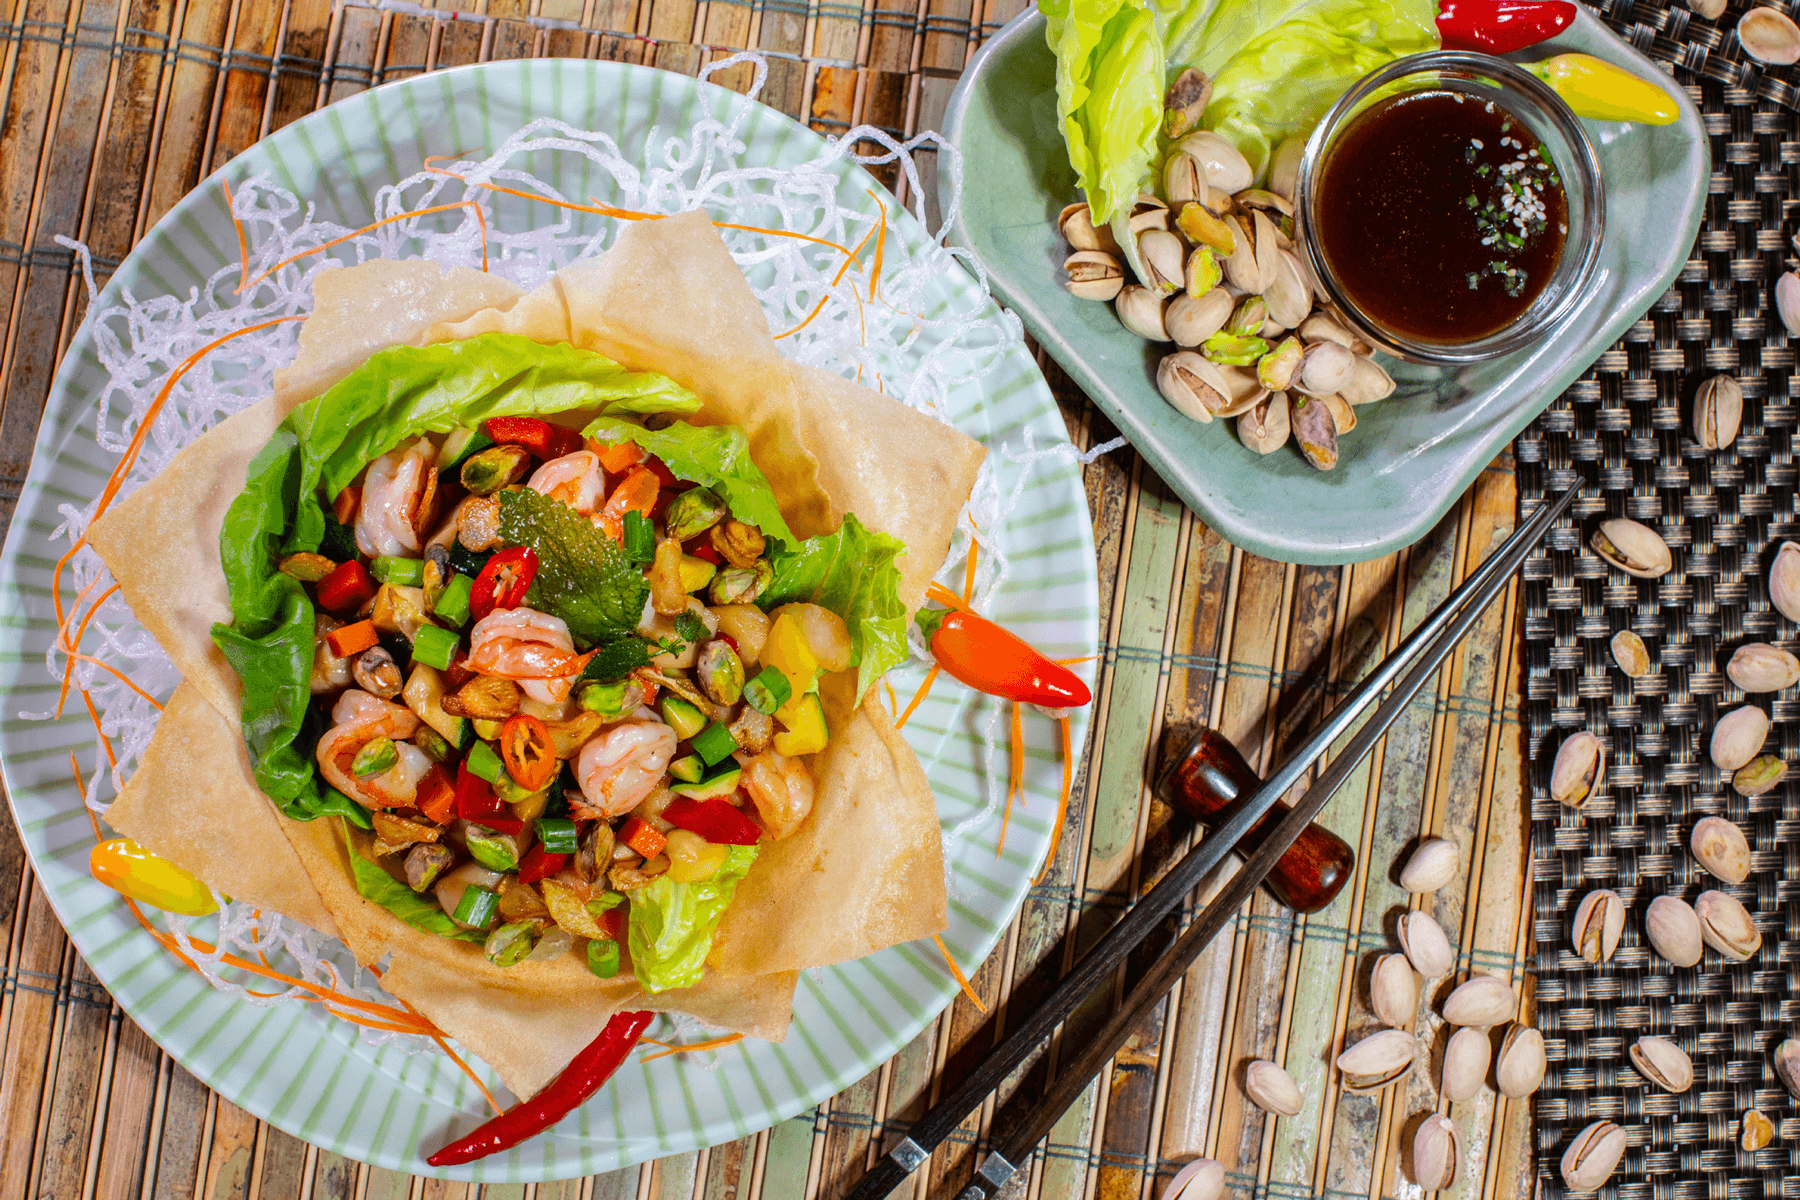 Happy Seafood in a Lettuce Cup